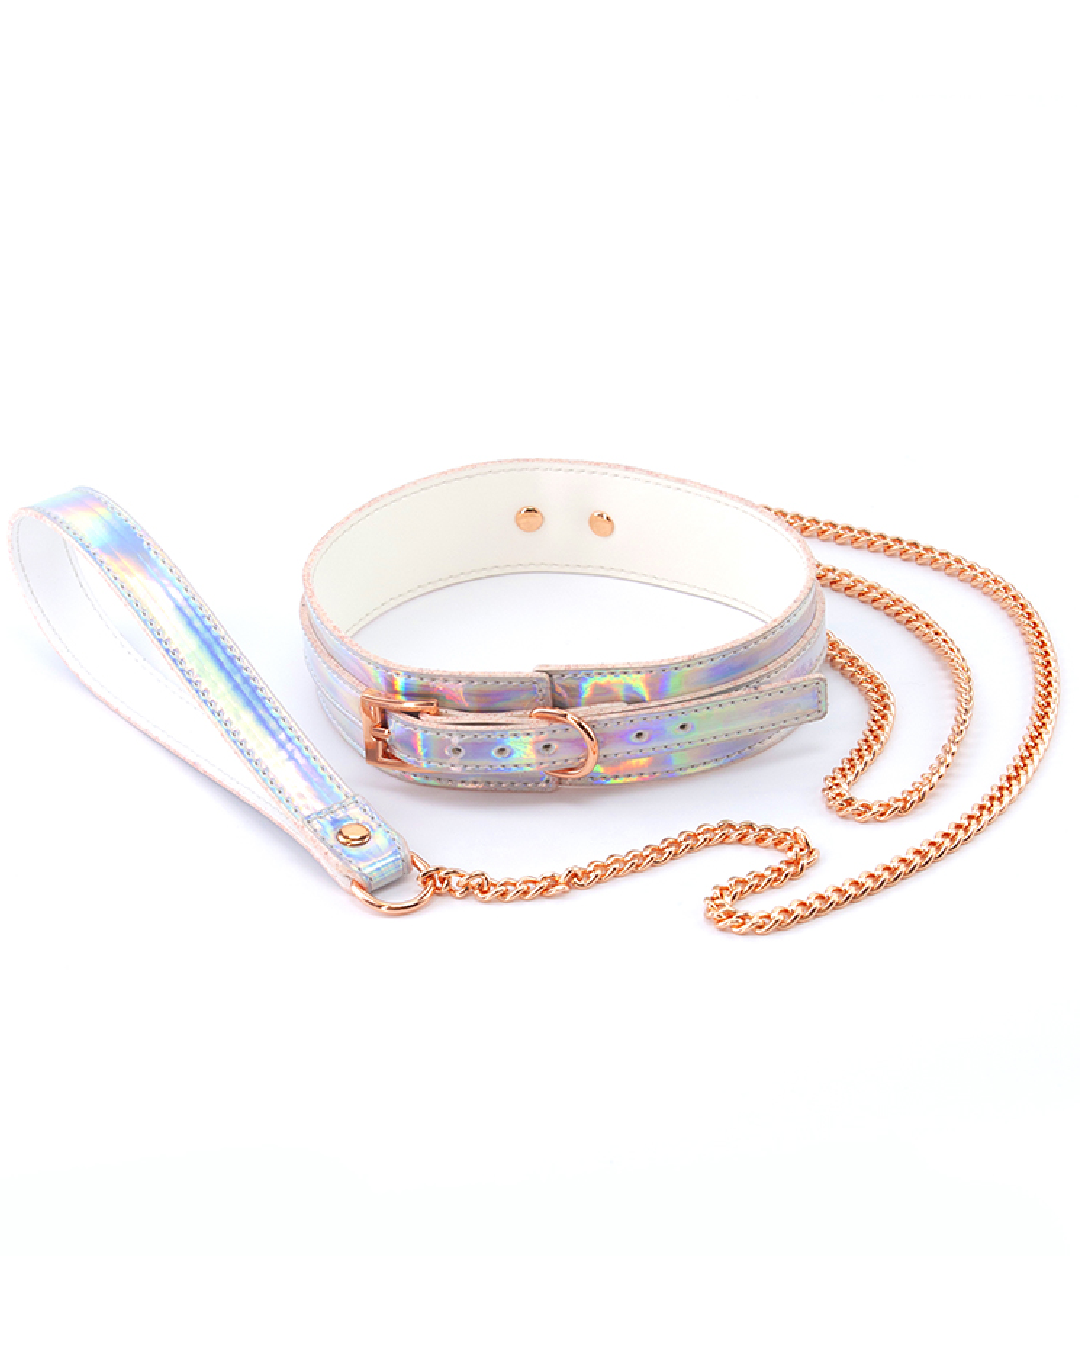 Cosmo Bondage Holographic Collar and Leash on white background 